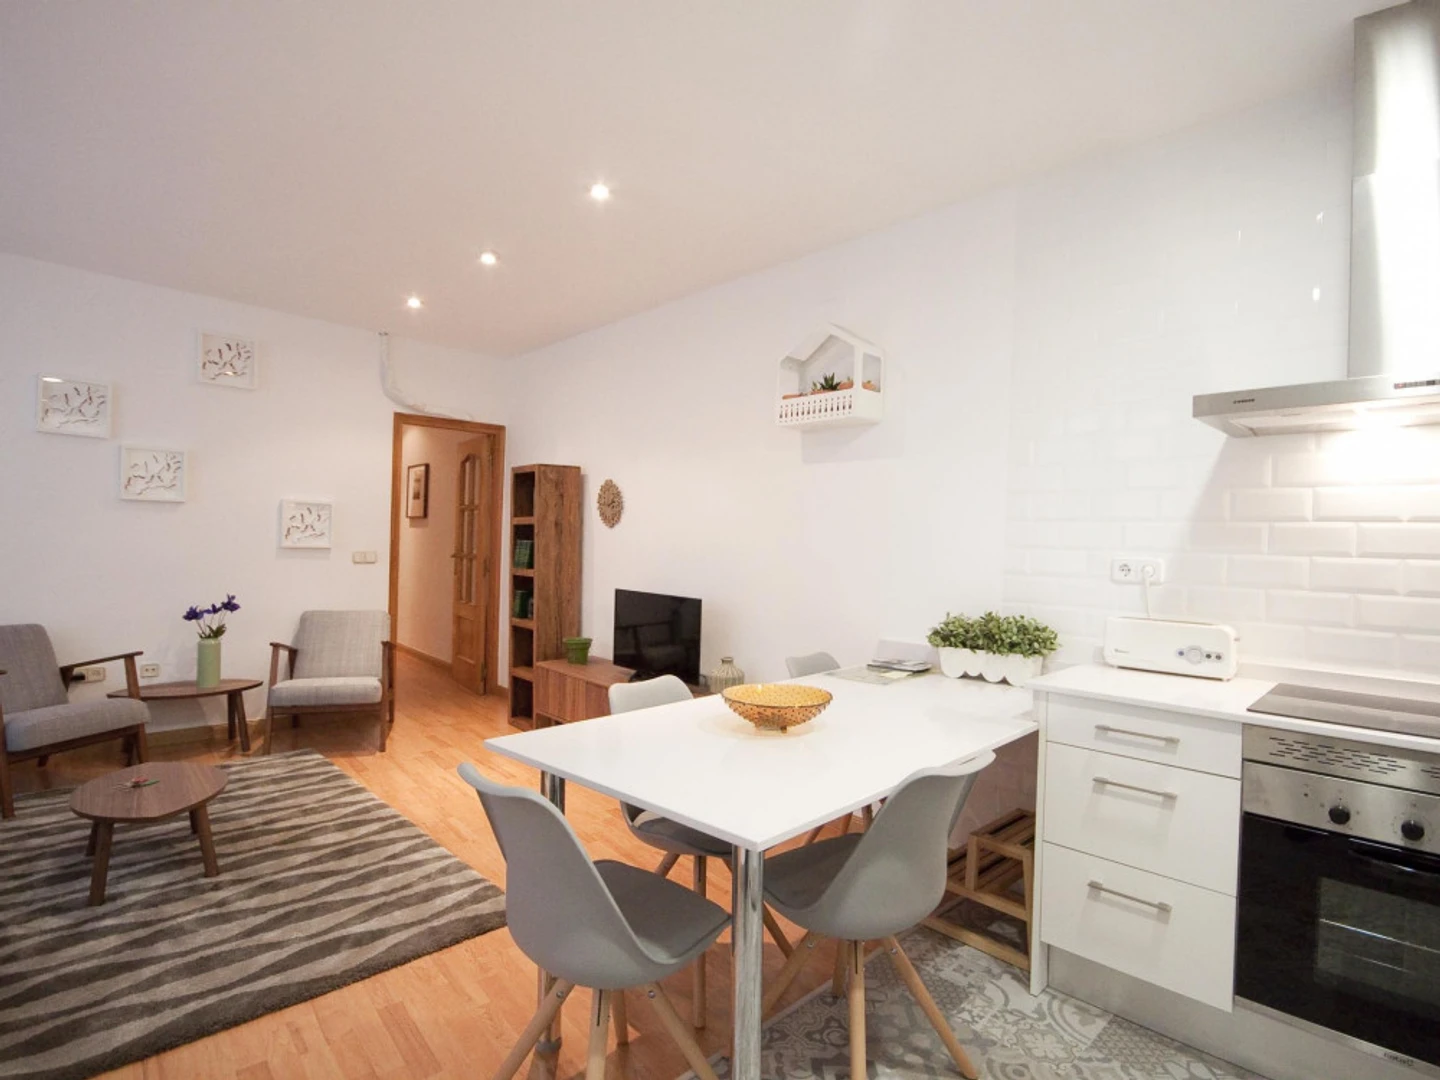 Accommodation in the centre of Madrid